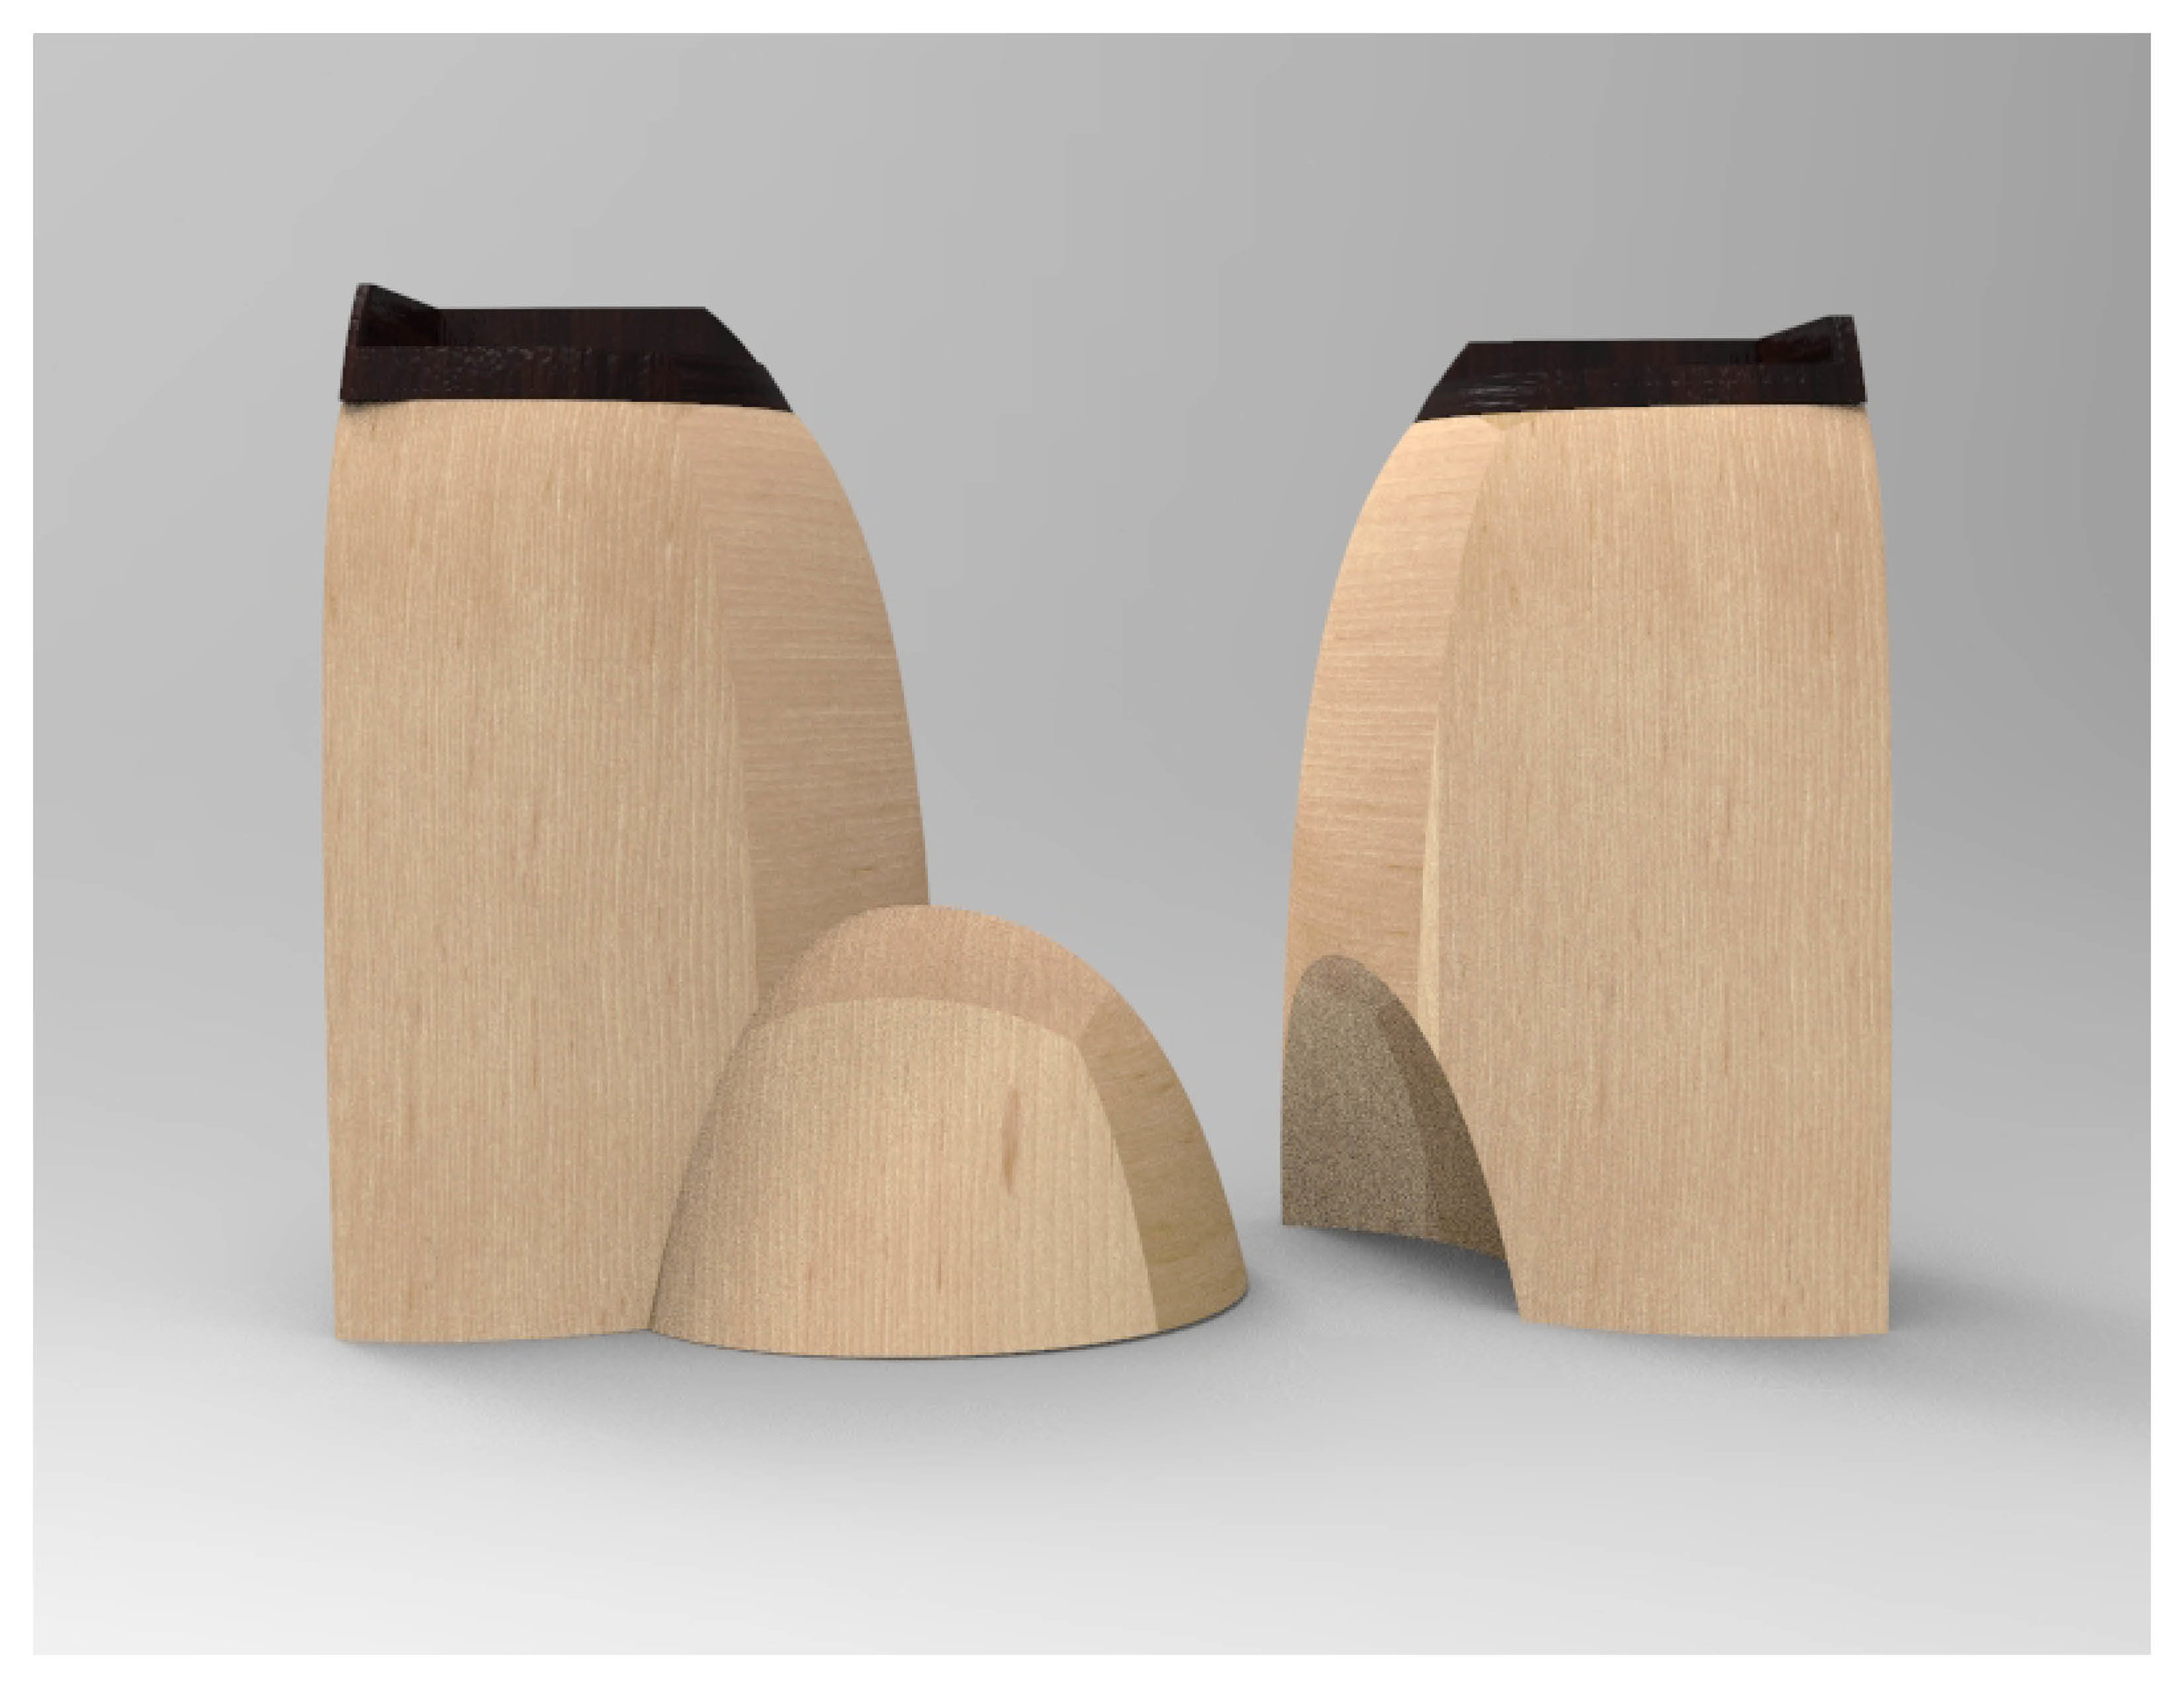 Stool Concept 3: Frontal View (Deconstructed)